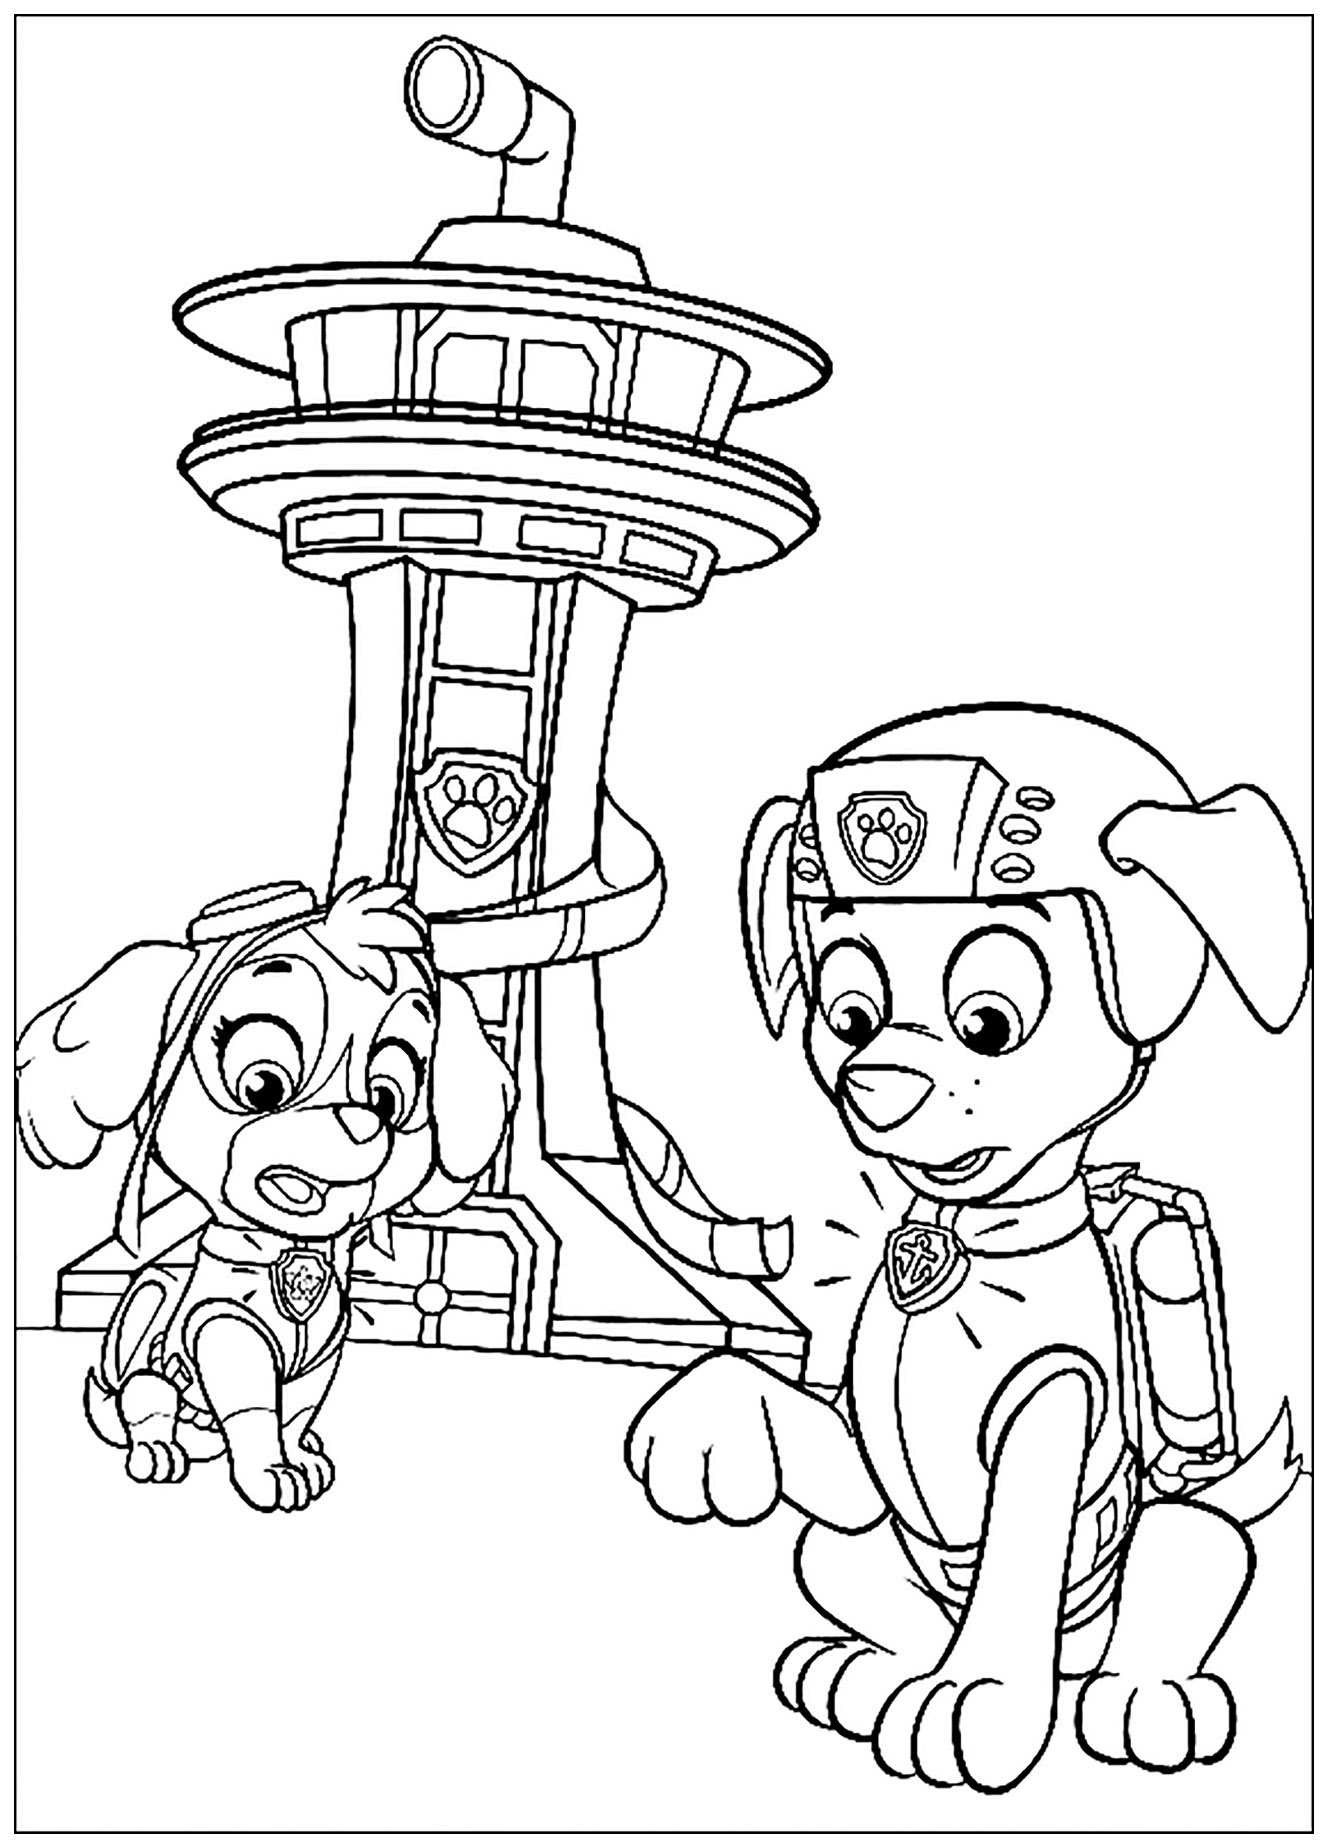 Paw Patrol Coloring Pages FREE Printable 103